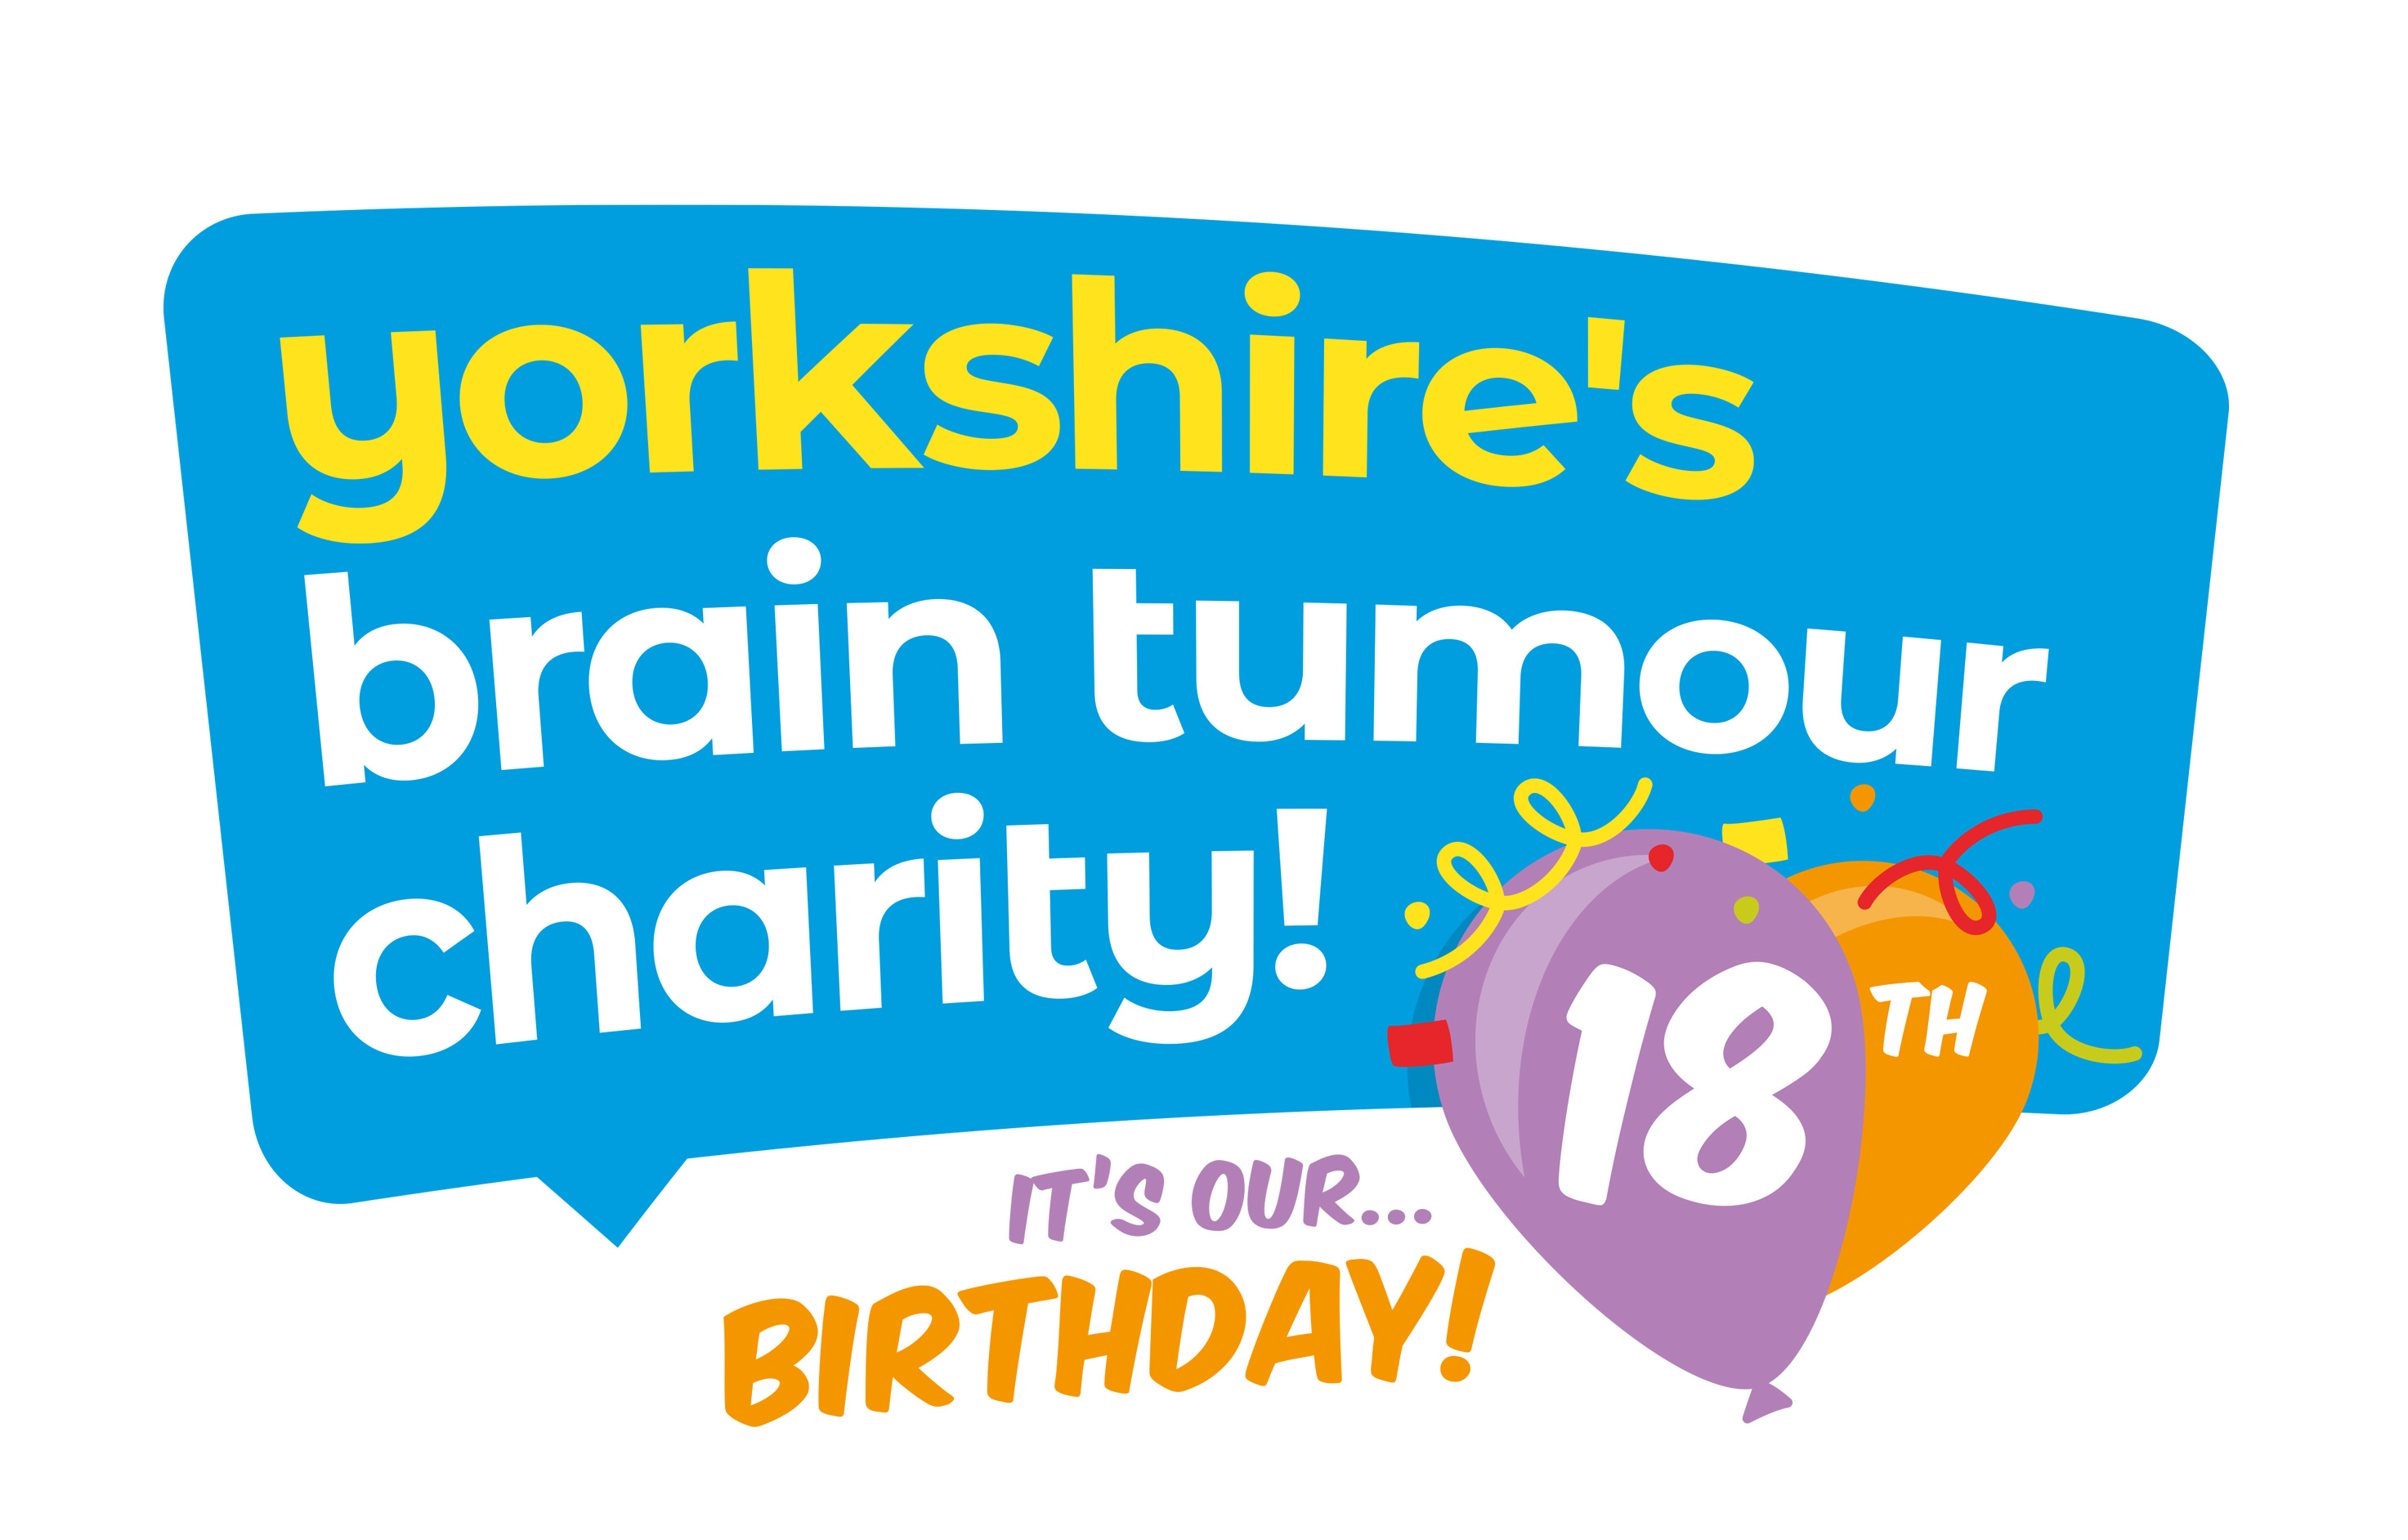 Yorkshire’s Brain Tumour Charity turns 18 on 12th February!